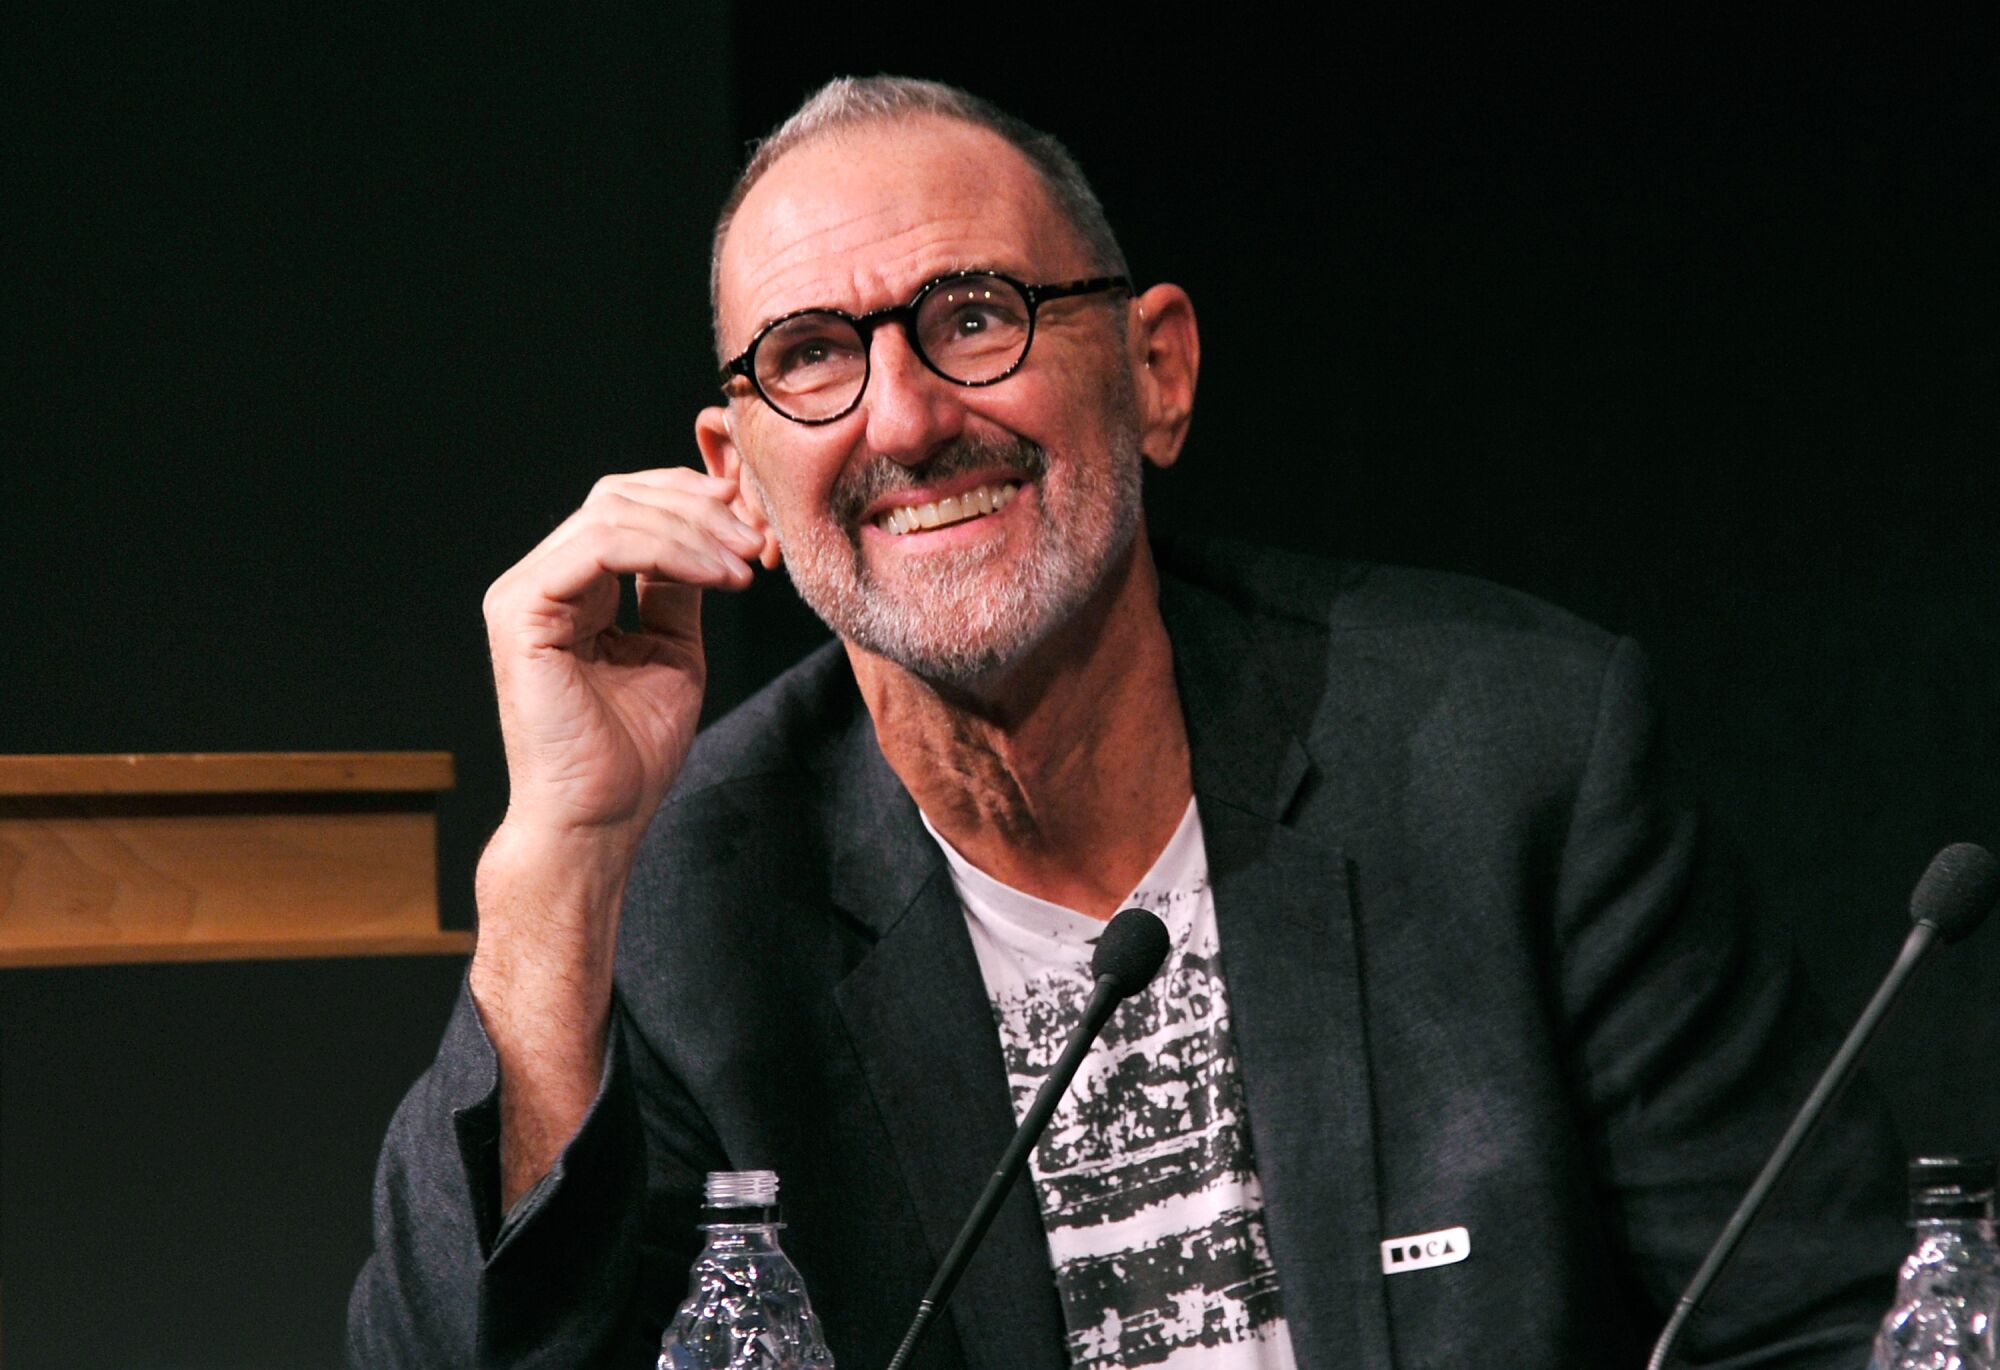 Architect Thom Mayne at a panel discussion in 2013